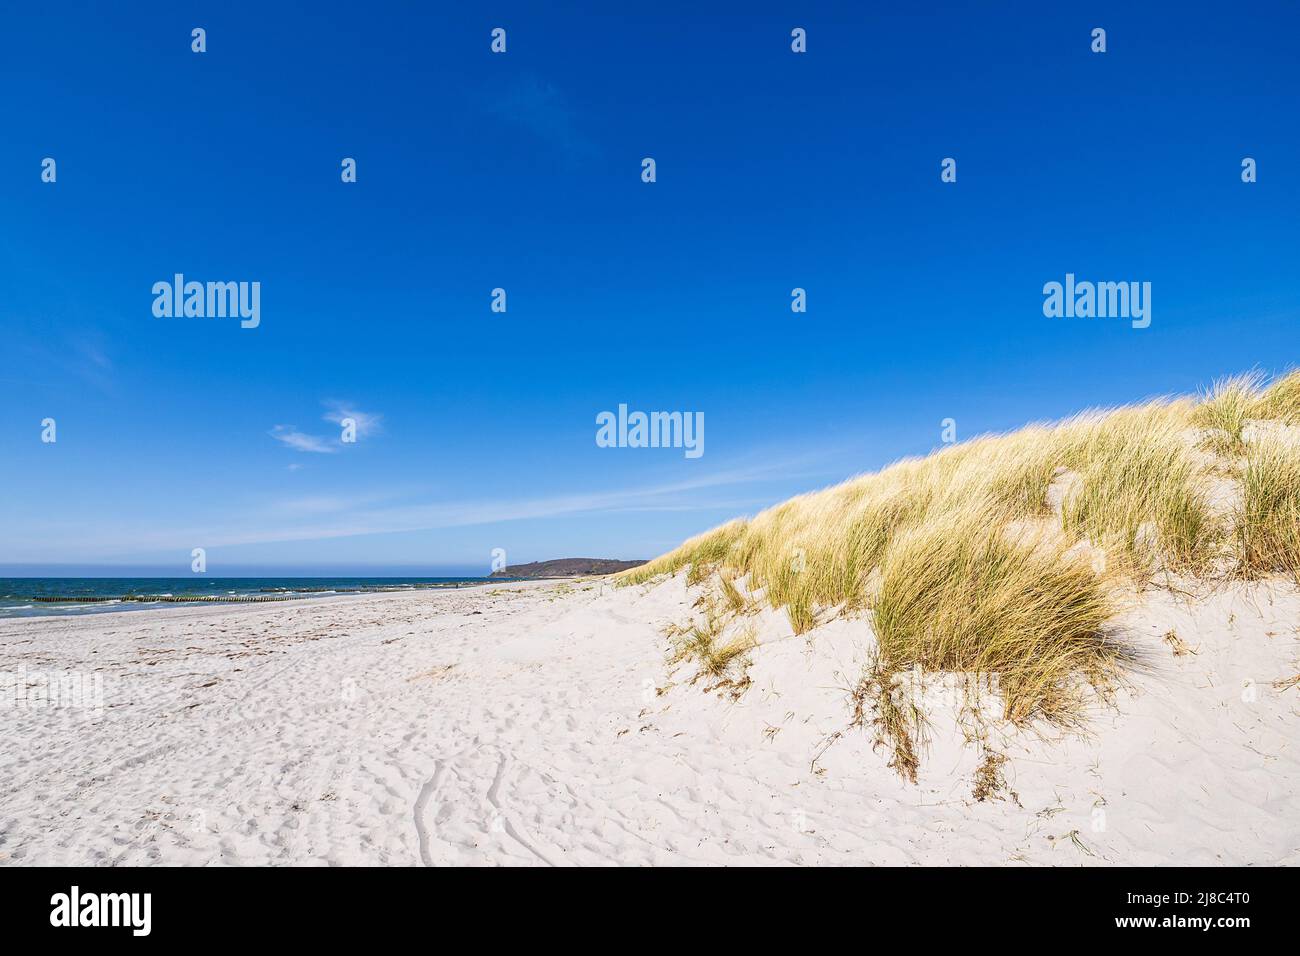 Beach and dunes in Vitte on the island Hiddensee, Germany. Stock Photo